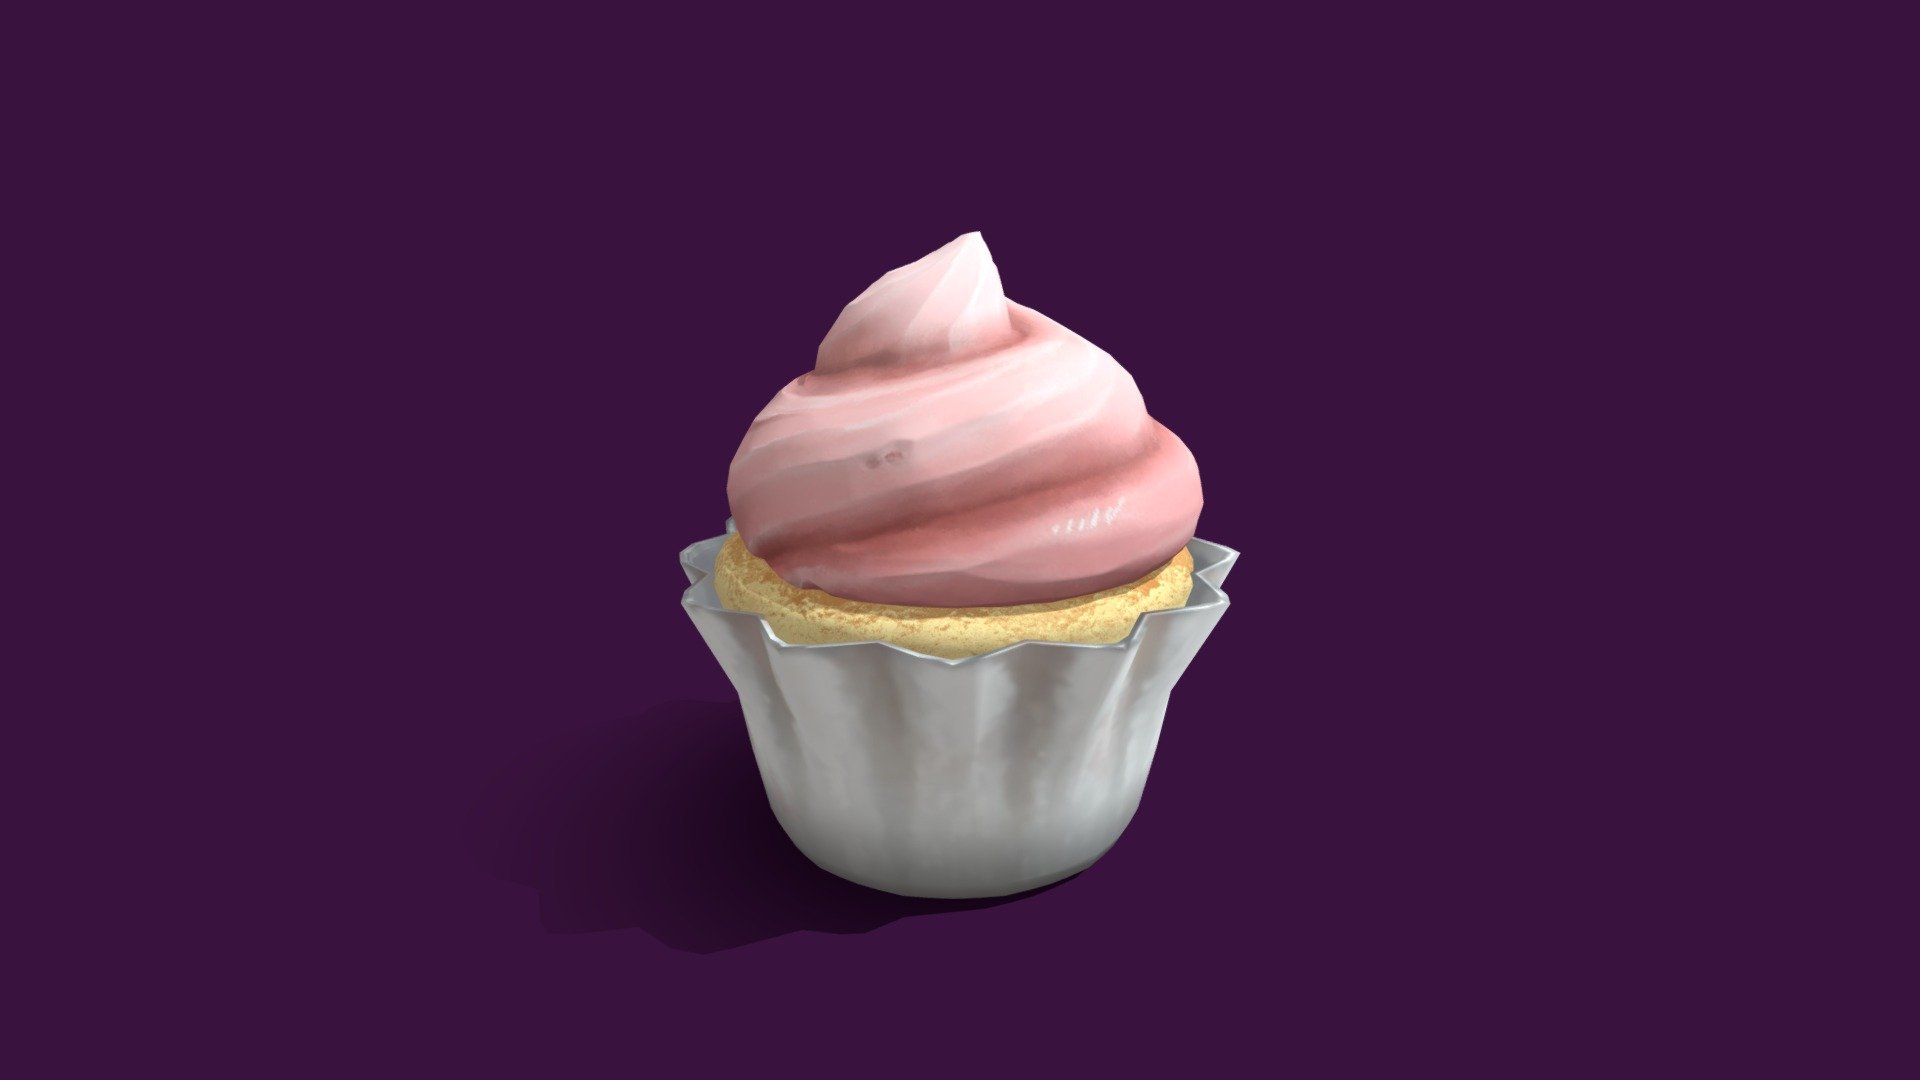 A lil cupcake I did for fun! Wanted to make a prop start to finish, so think of this as a sketch. Just to get me back into the flow of things 😋🧁 Hope you enjoy!

Also free to download! - Stylized Cupcake - Download Free 3D model by siapap 3d model